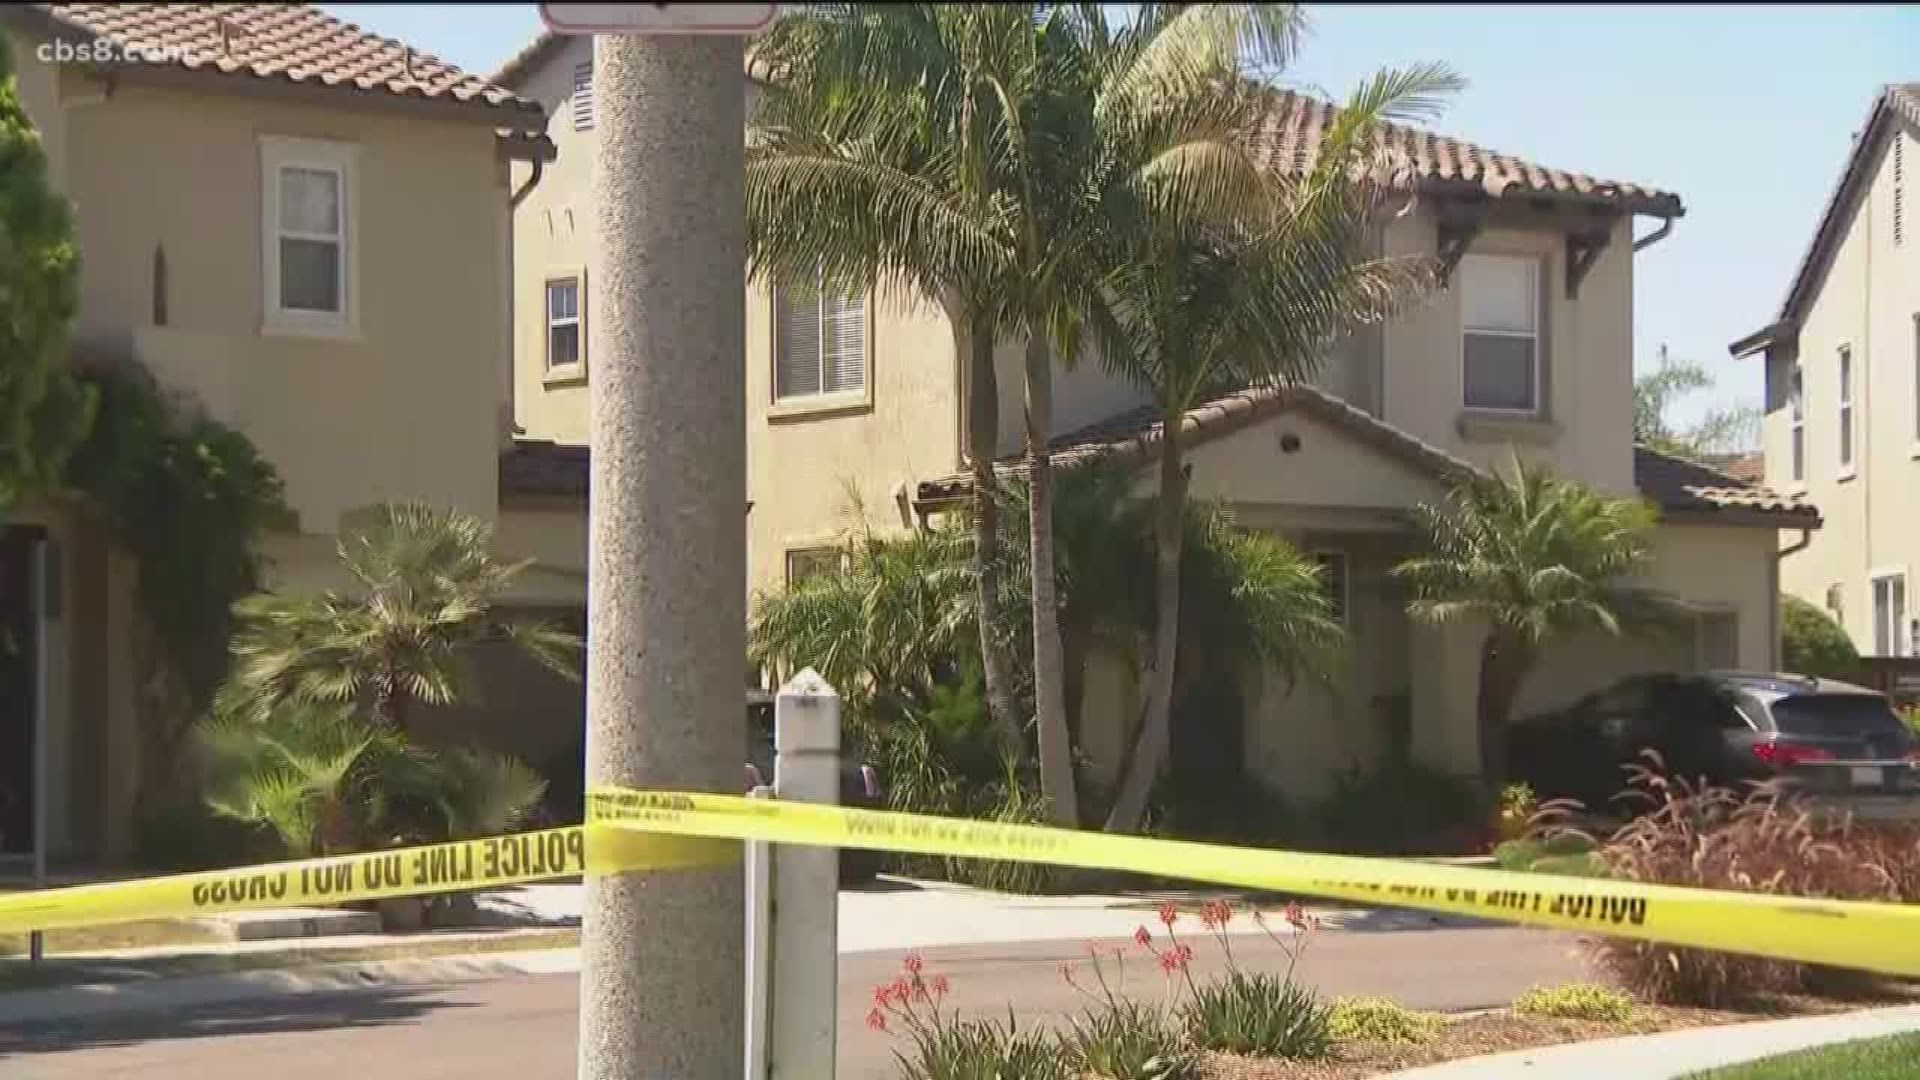 A man and woman were found dead in their Torrey Highlands home Saturday night, a day after a male believed to be their son was found dead near Sorrento Valley.